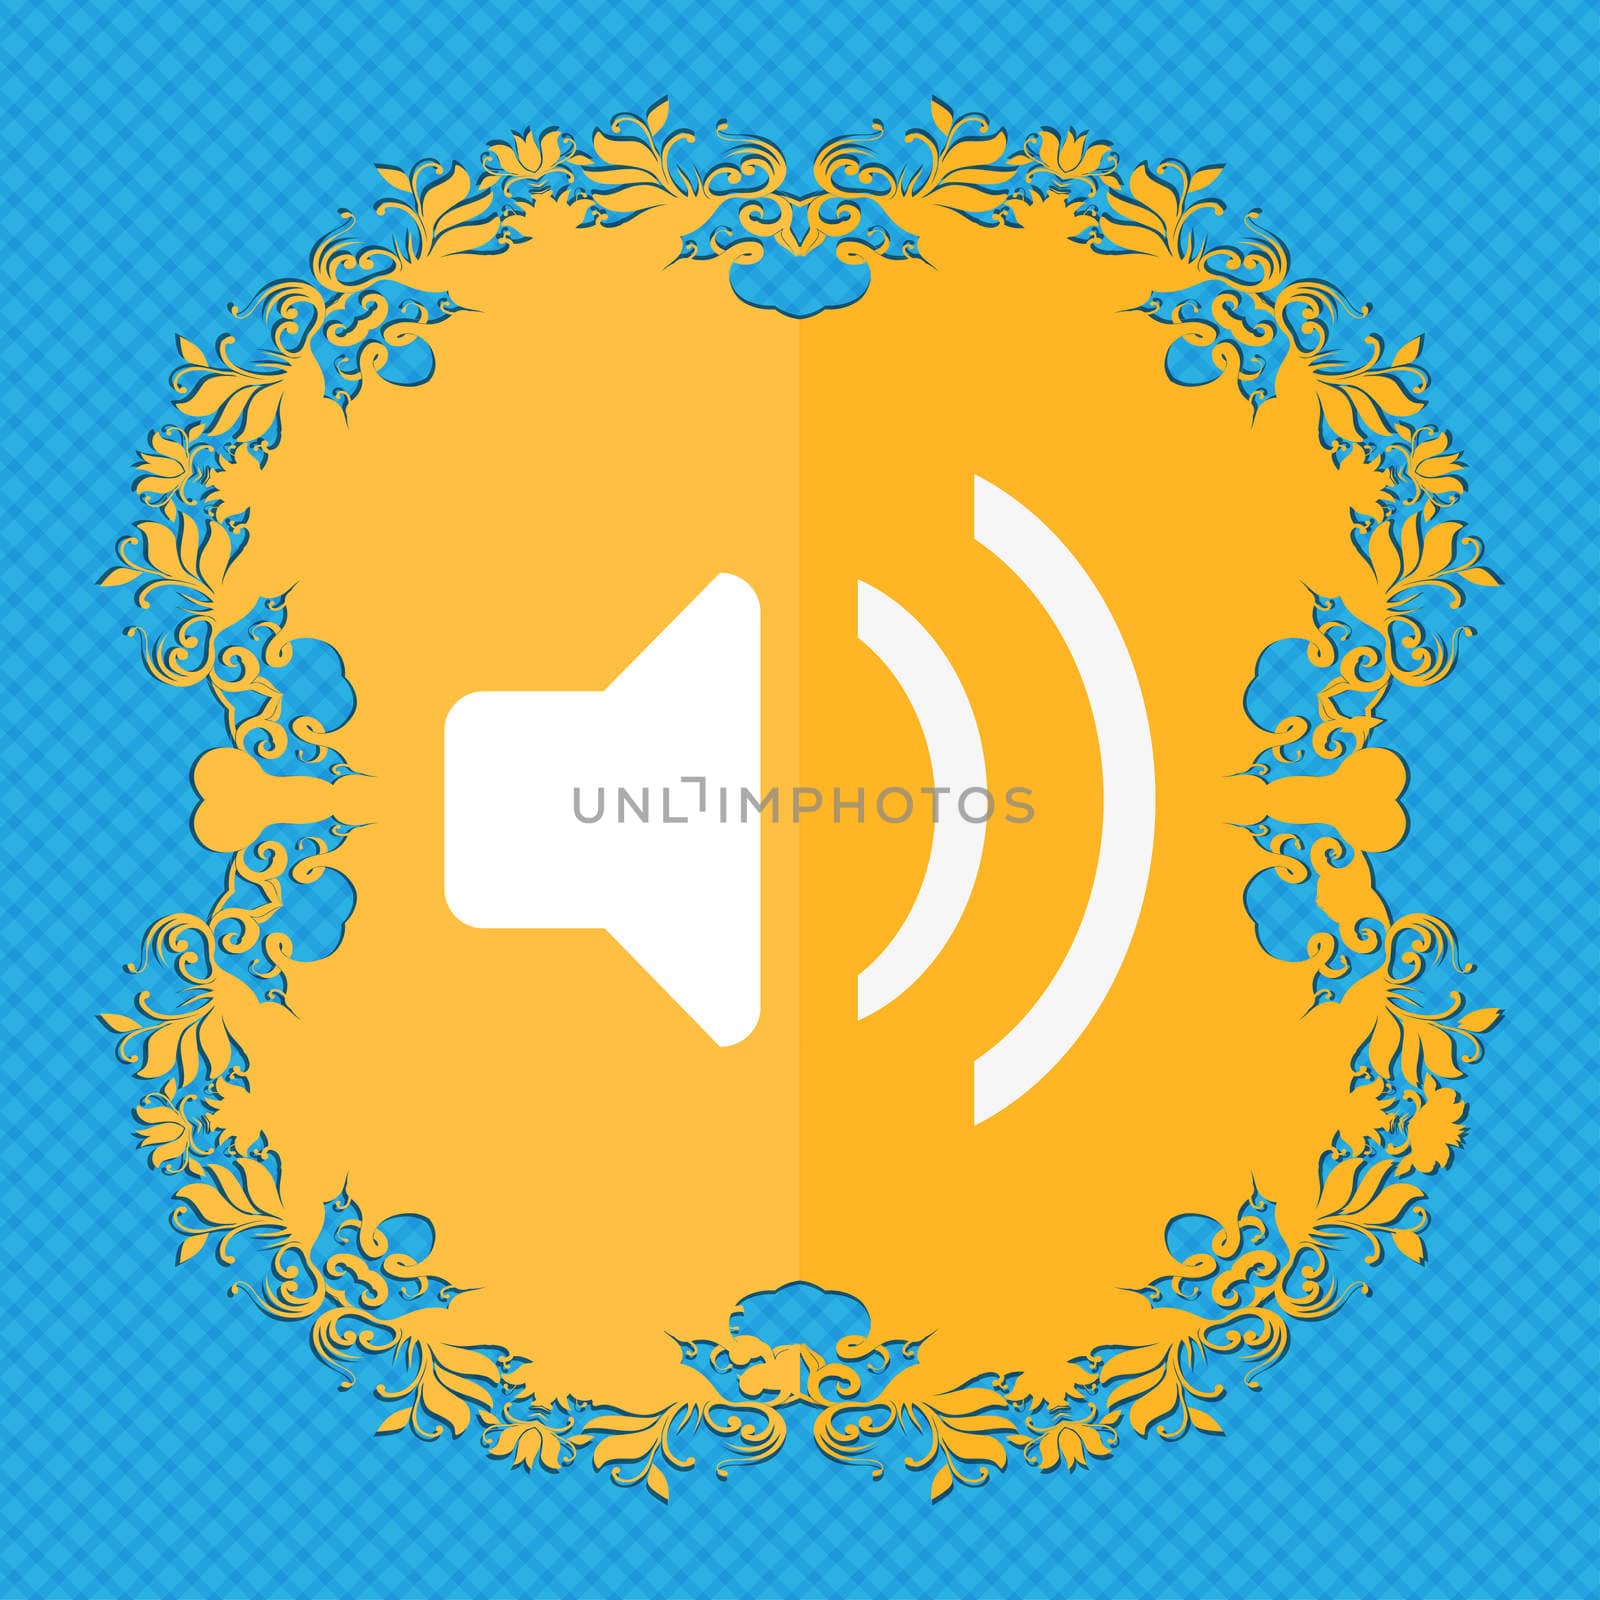 Speaker volume, Sound . Floral flat design on a blue abstract background with place for your text. illustration